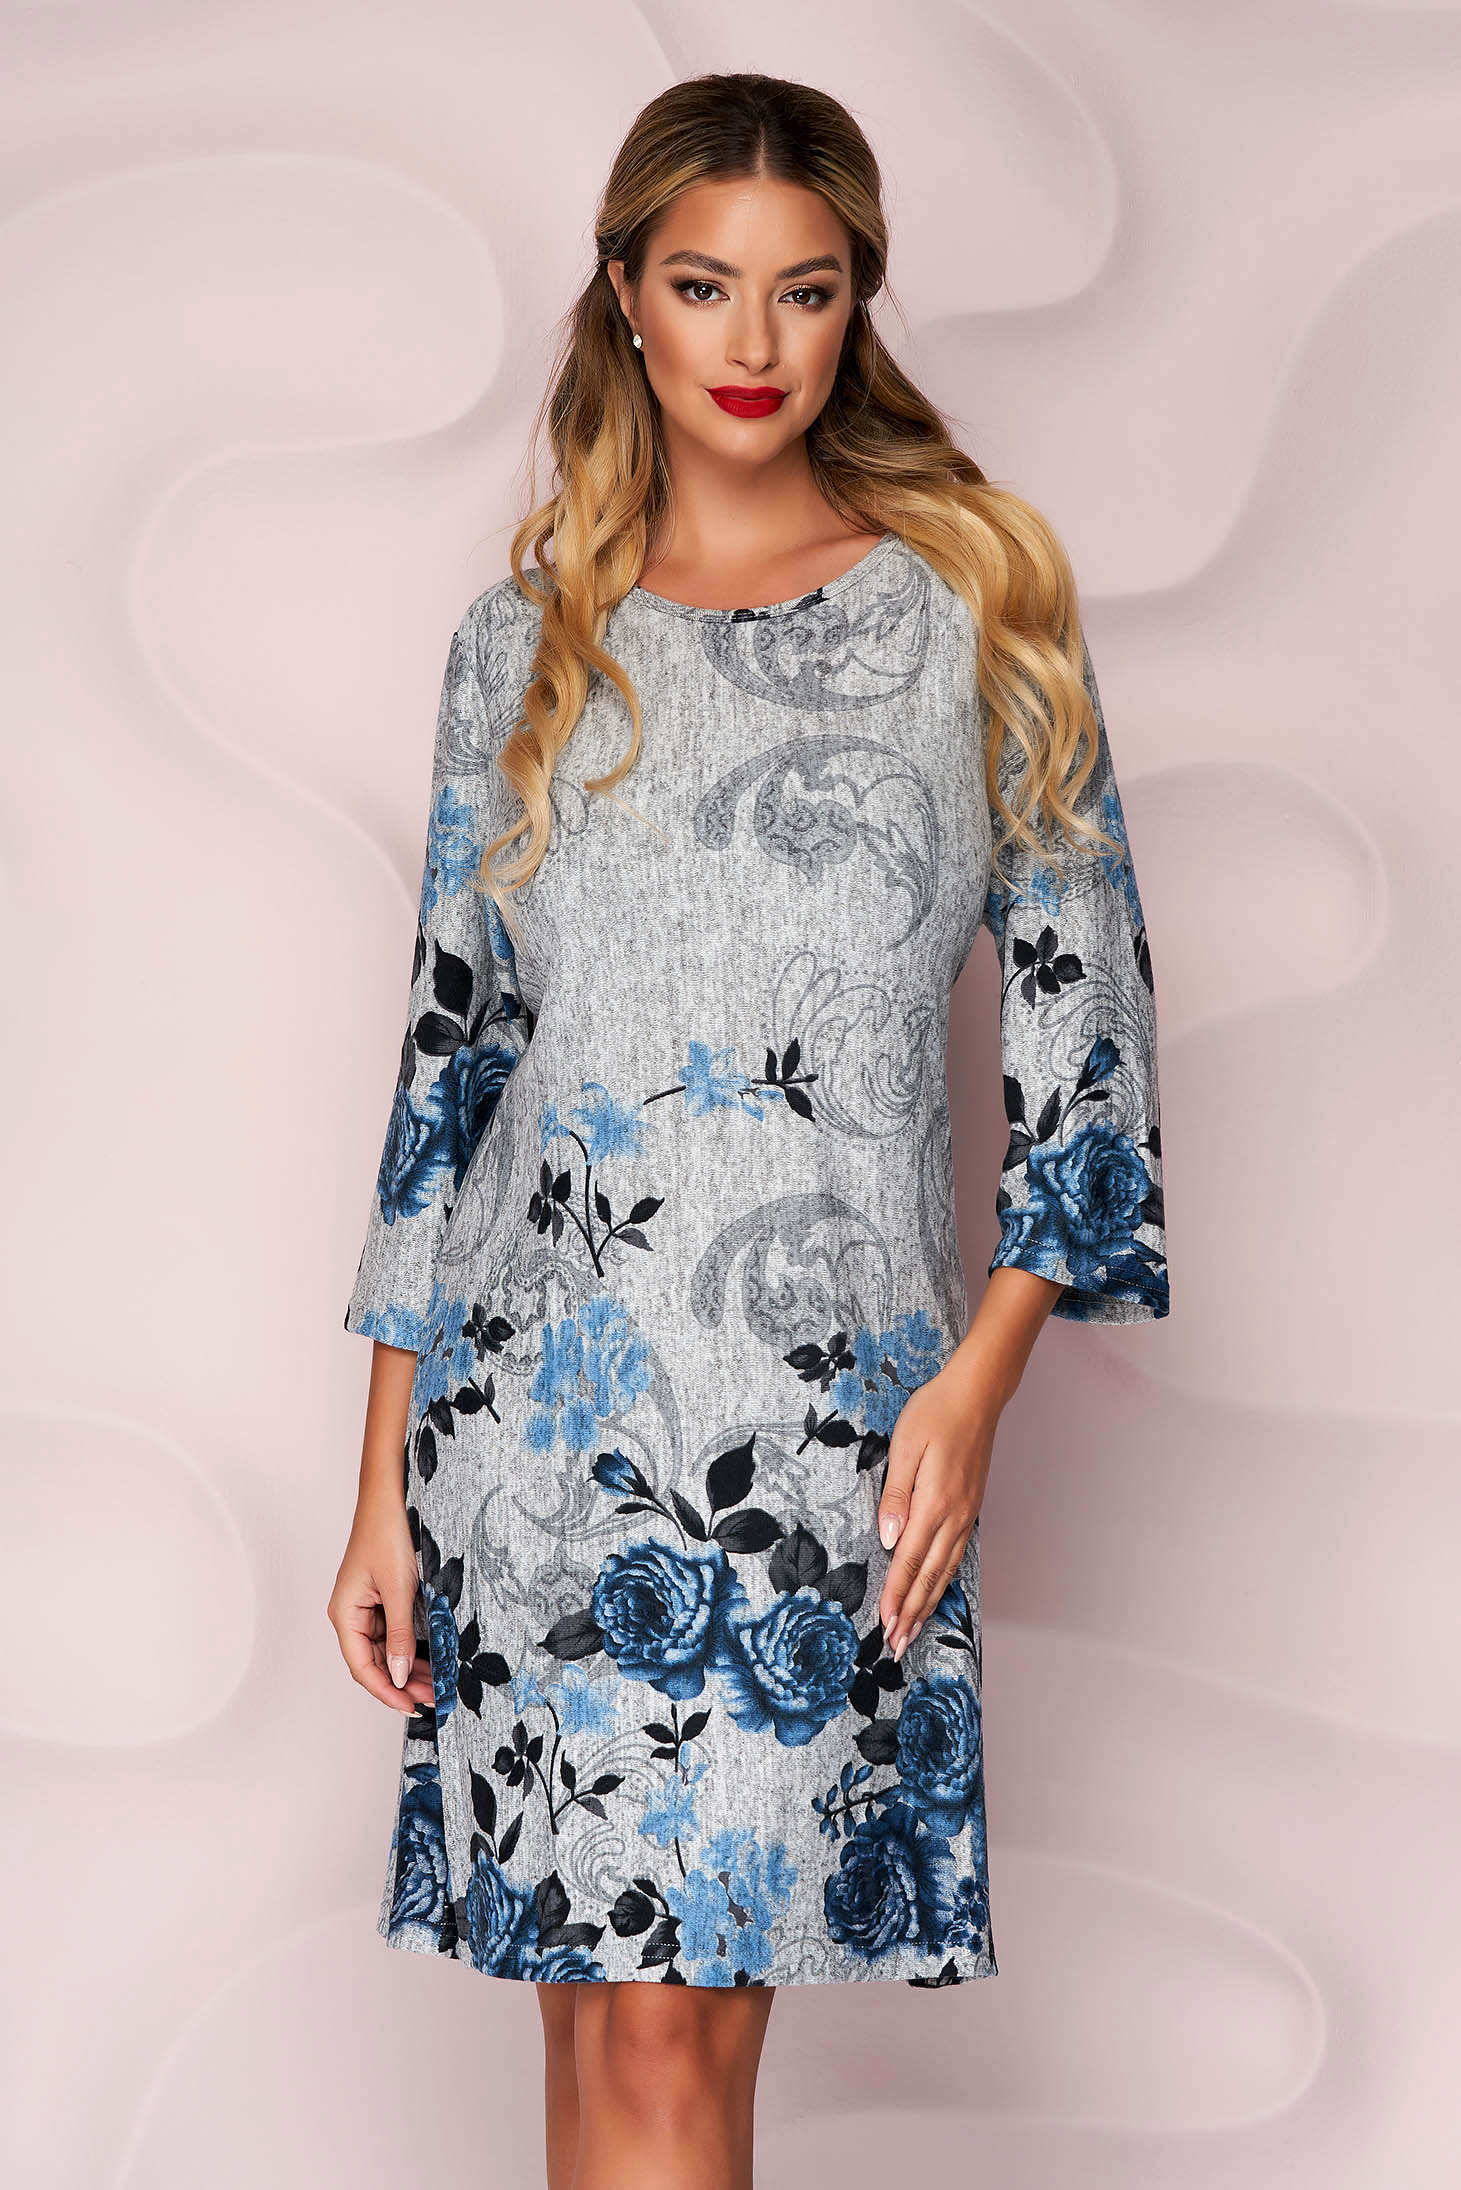 Grey dress straight knitted thin fabric from elastic fabric with floral print